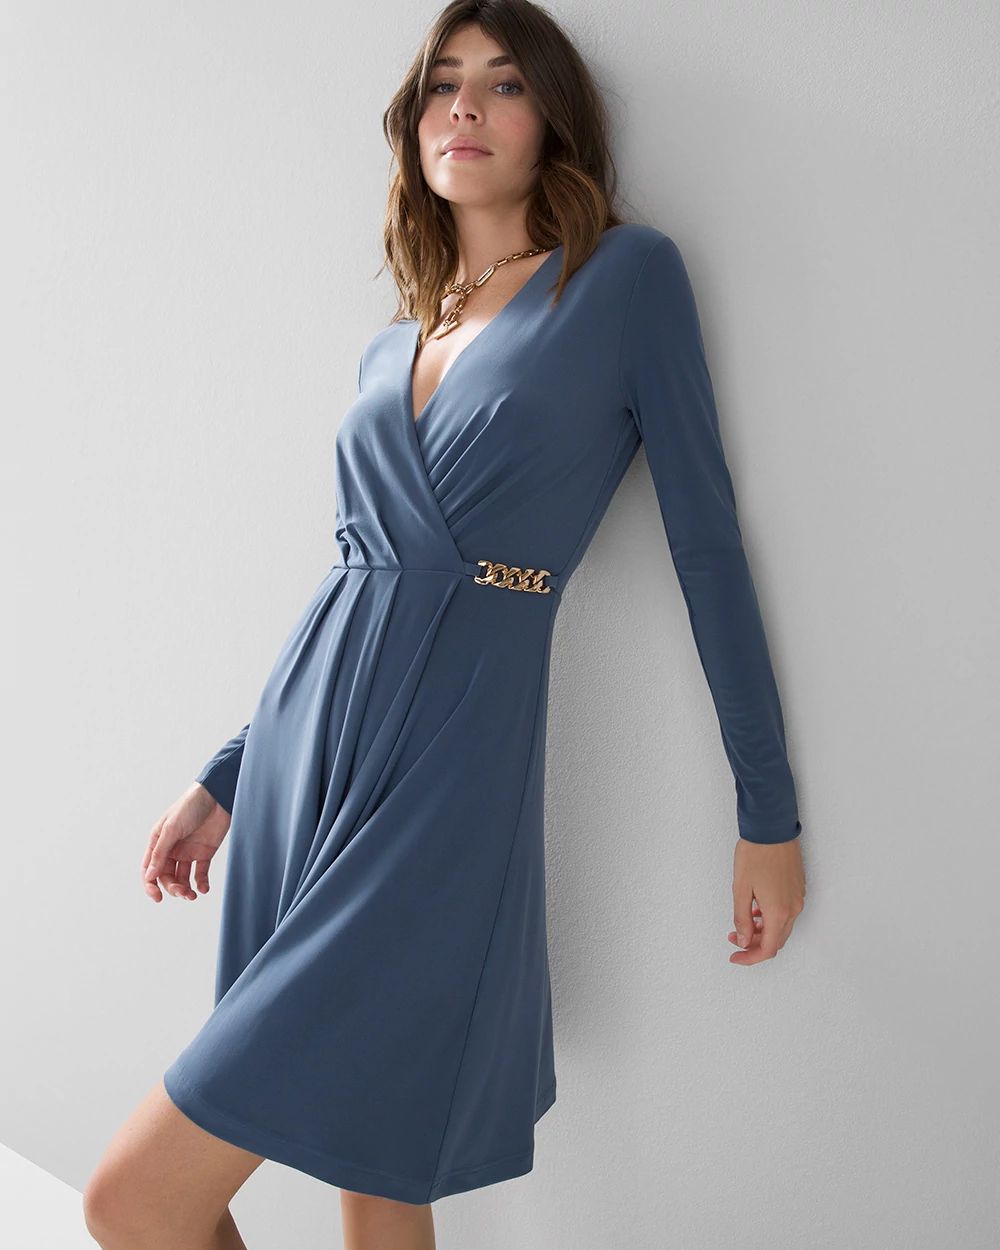 Long-Sleeve Matte Jersey Chain Detail Fit & Flare Dress click to view larger image.